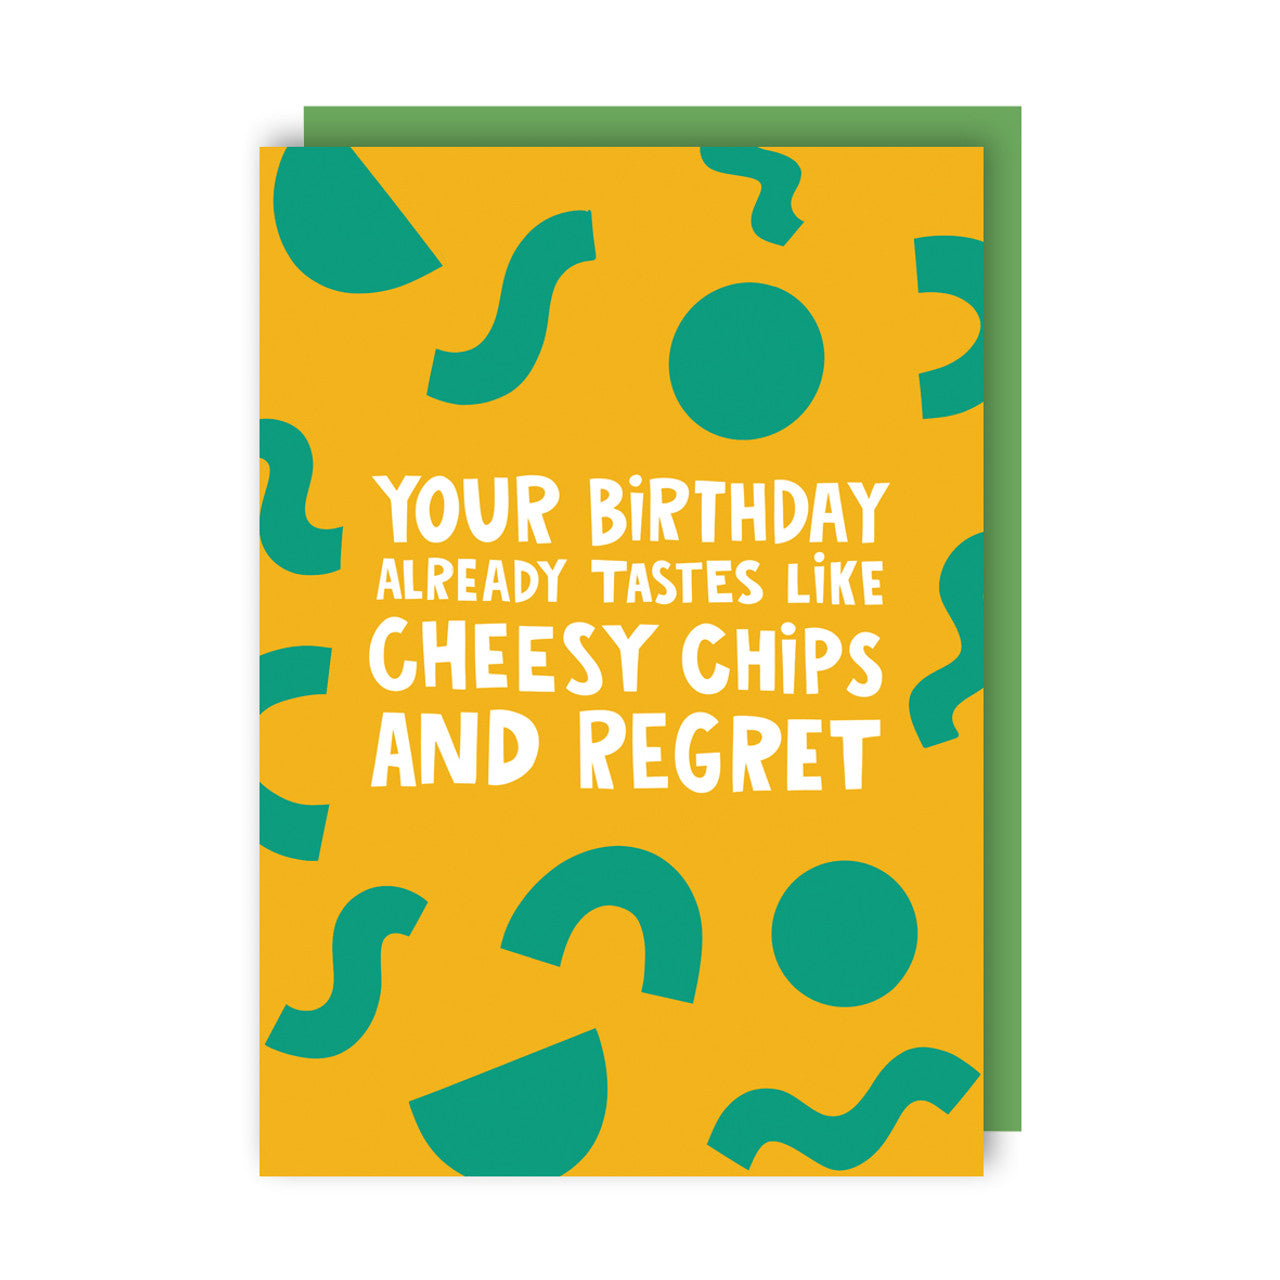 Birthday Card text reads "Your birthday already tastes like cheesy chips and regret"